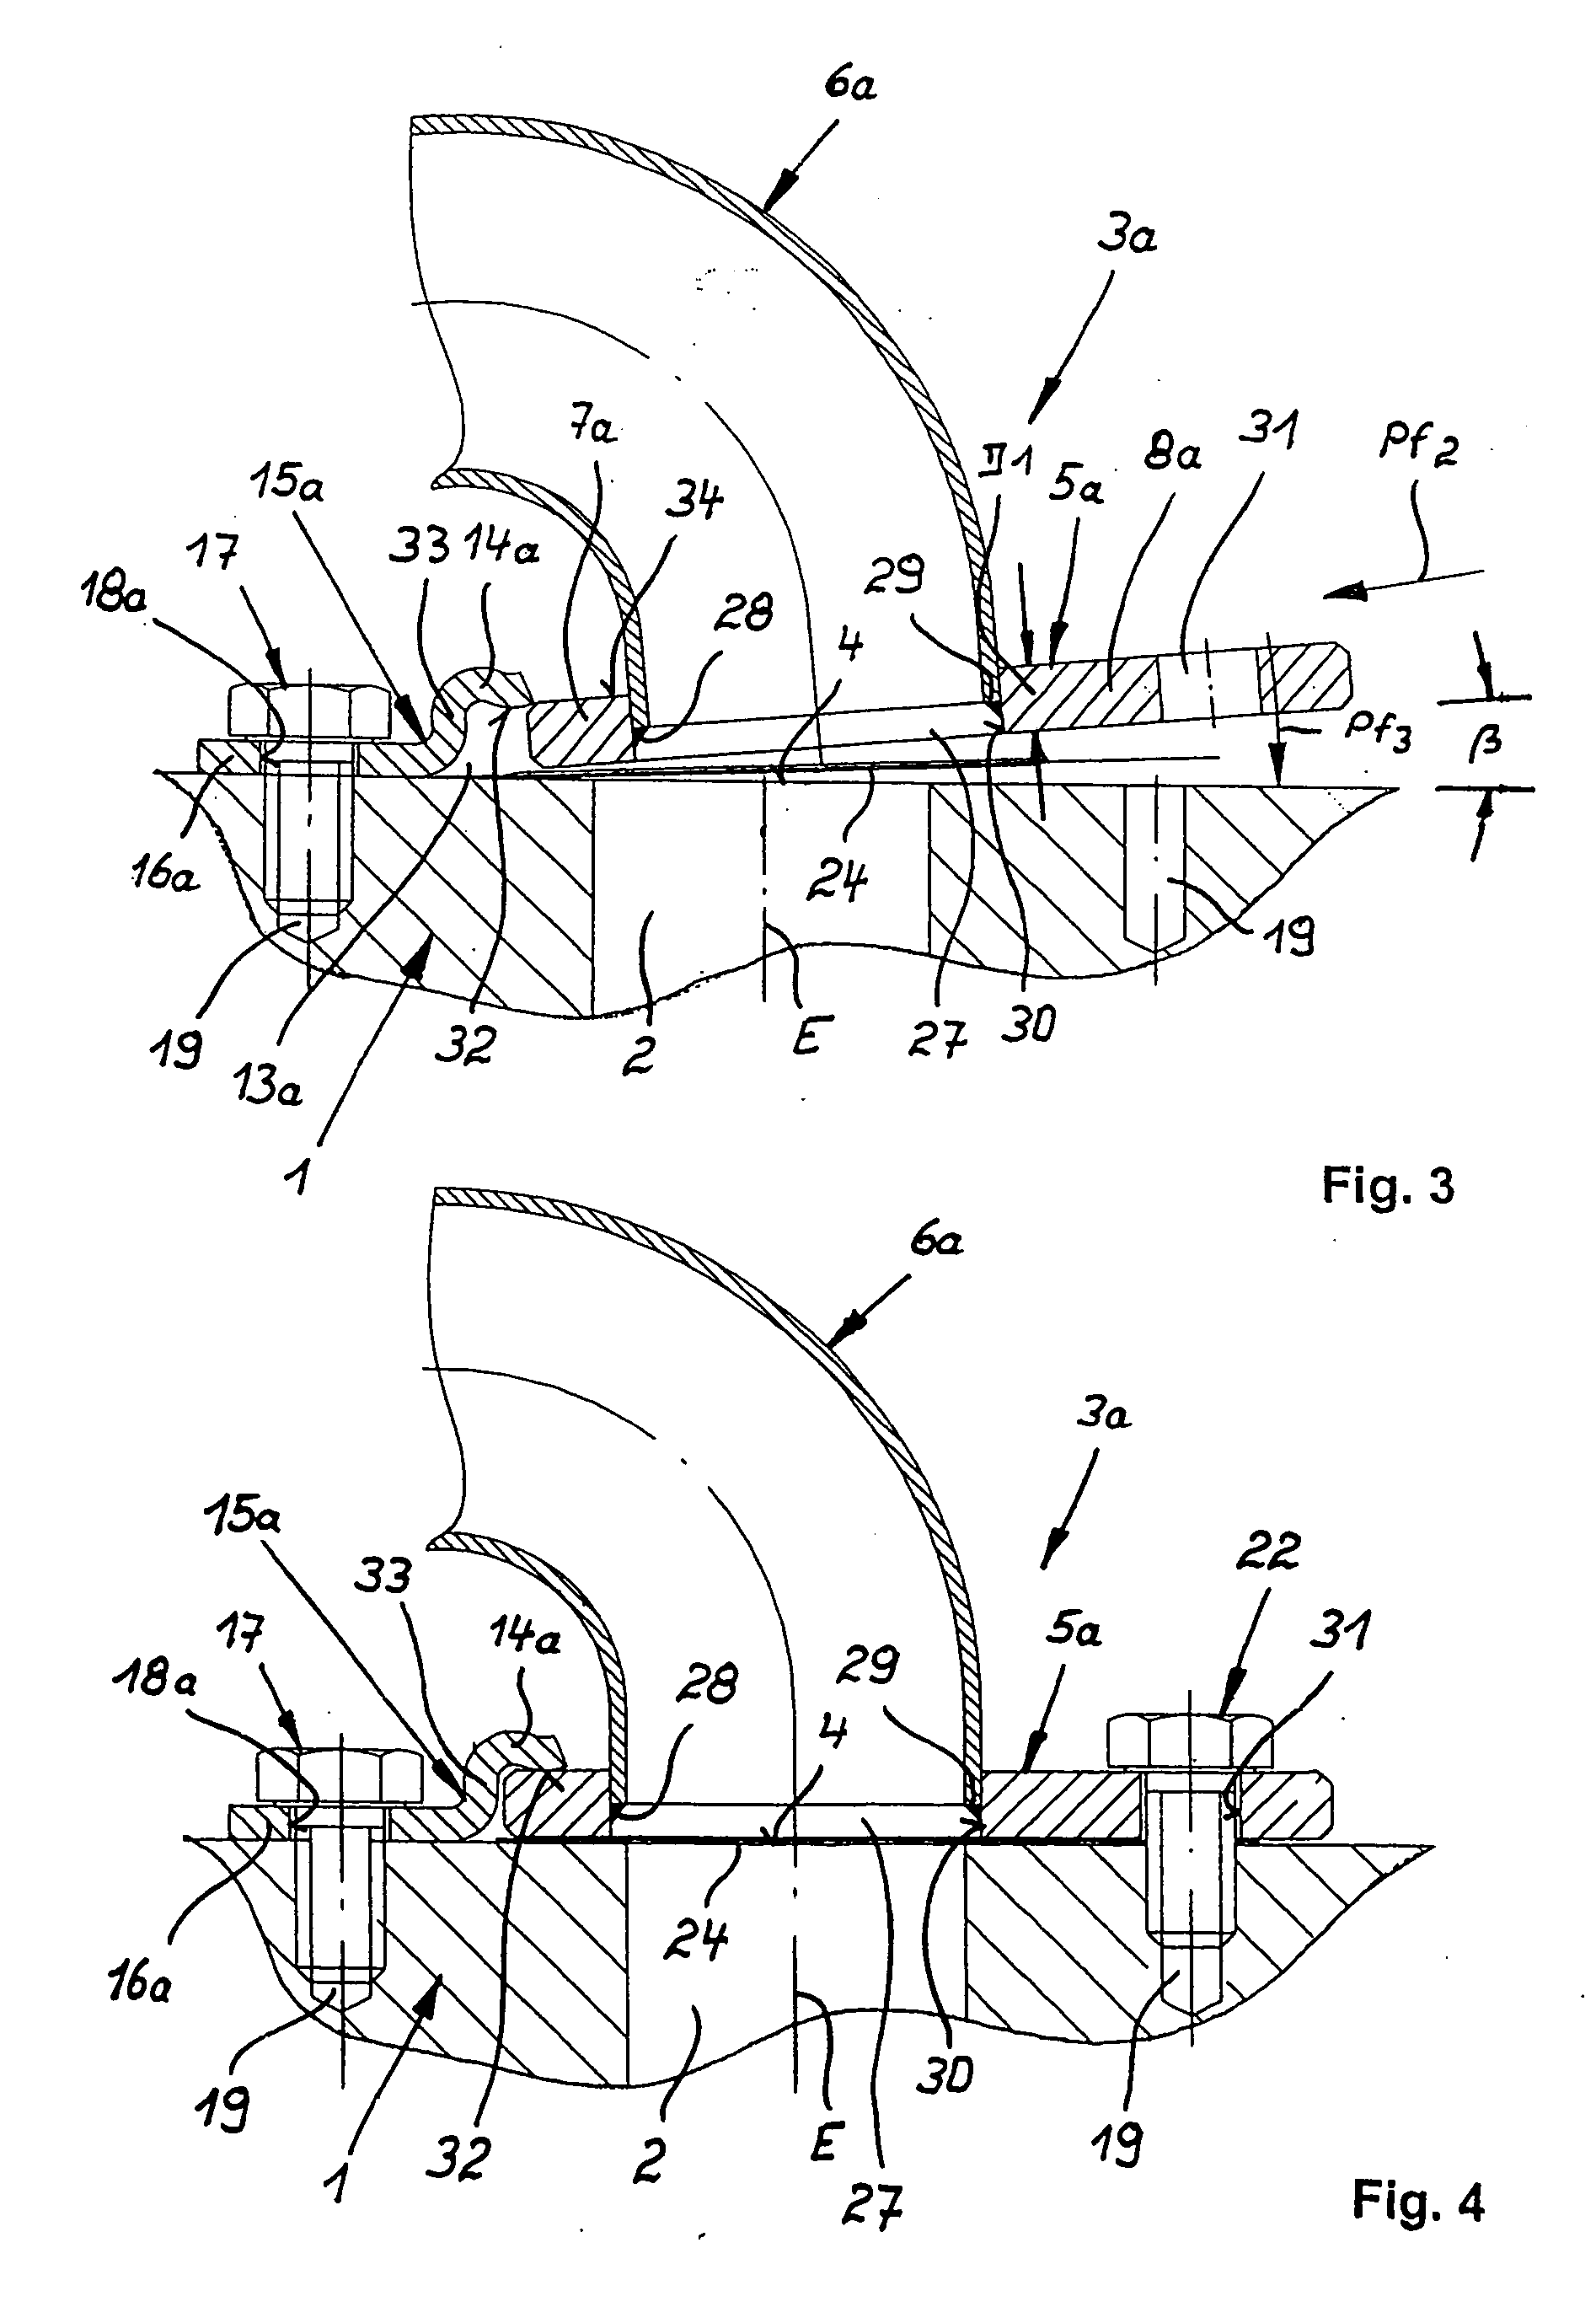 Arrangement for securely mounting an exhaust manifold to the cylinder head of an internal combustion engine